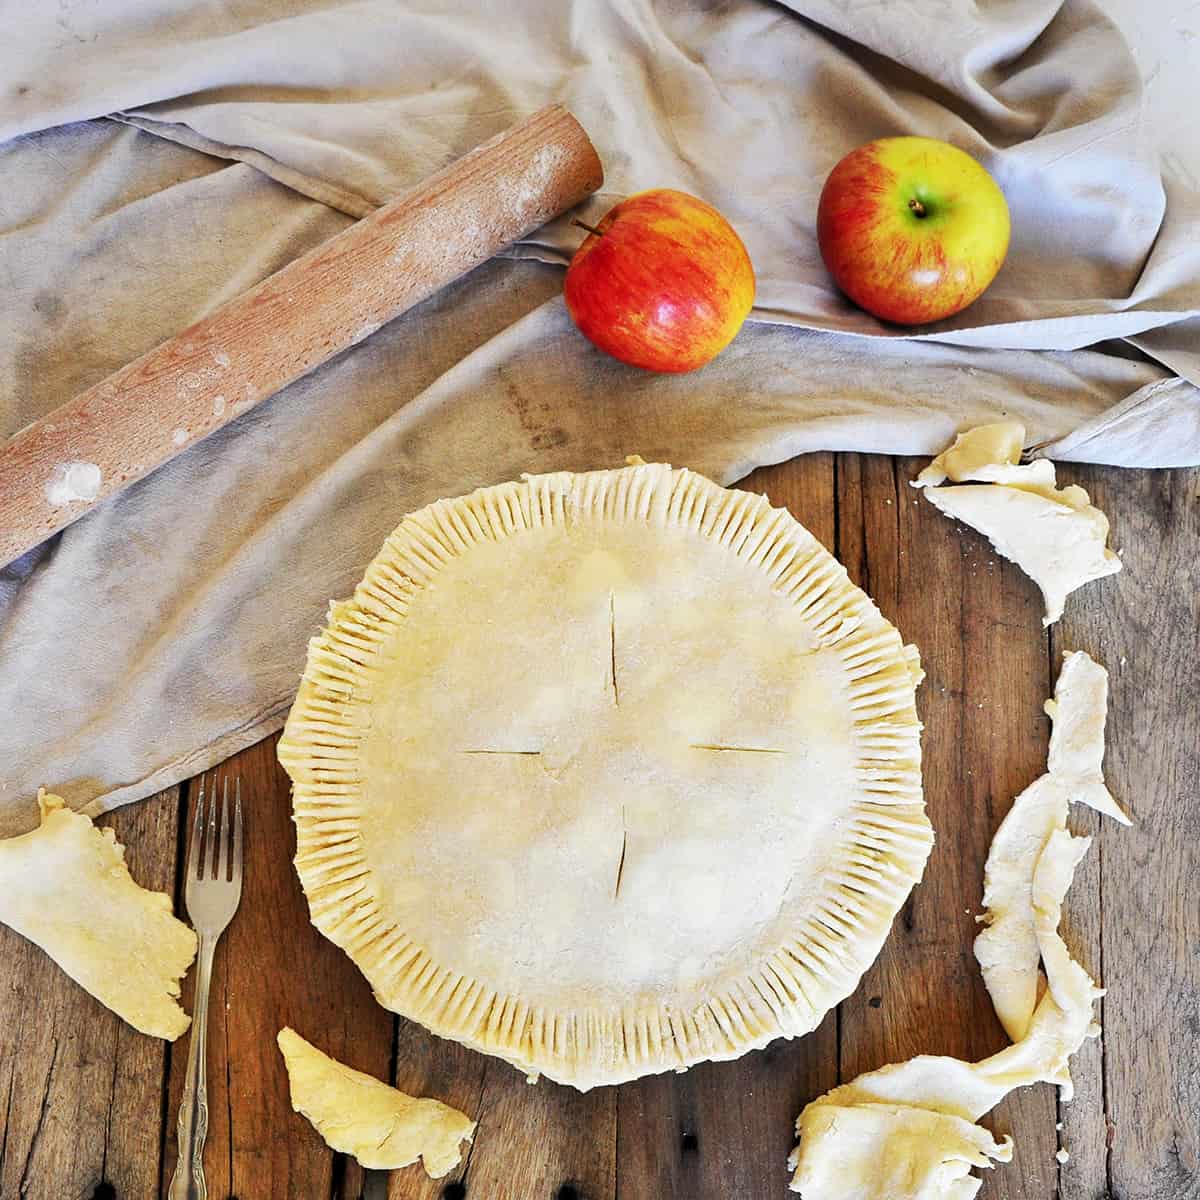 A Raw Pie Crust with apples in the pie. It is on a picnic table with two Braeburn apples, a rolling pin, and is laying on a cloth.